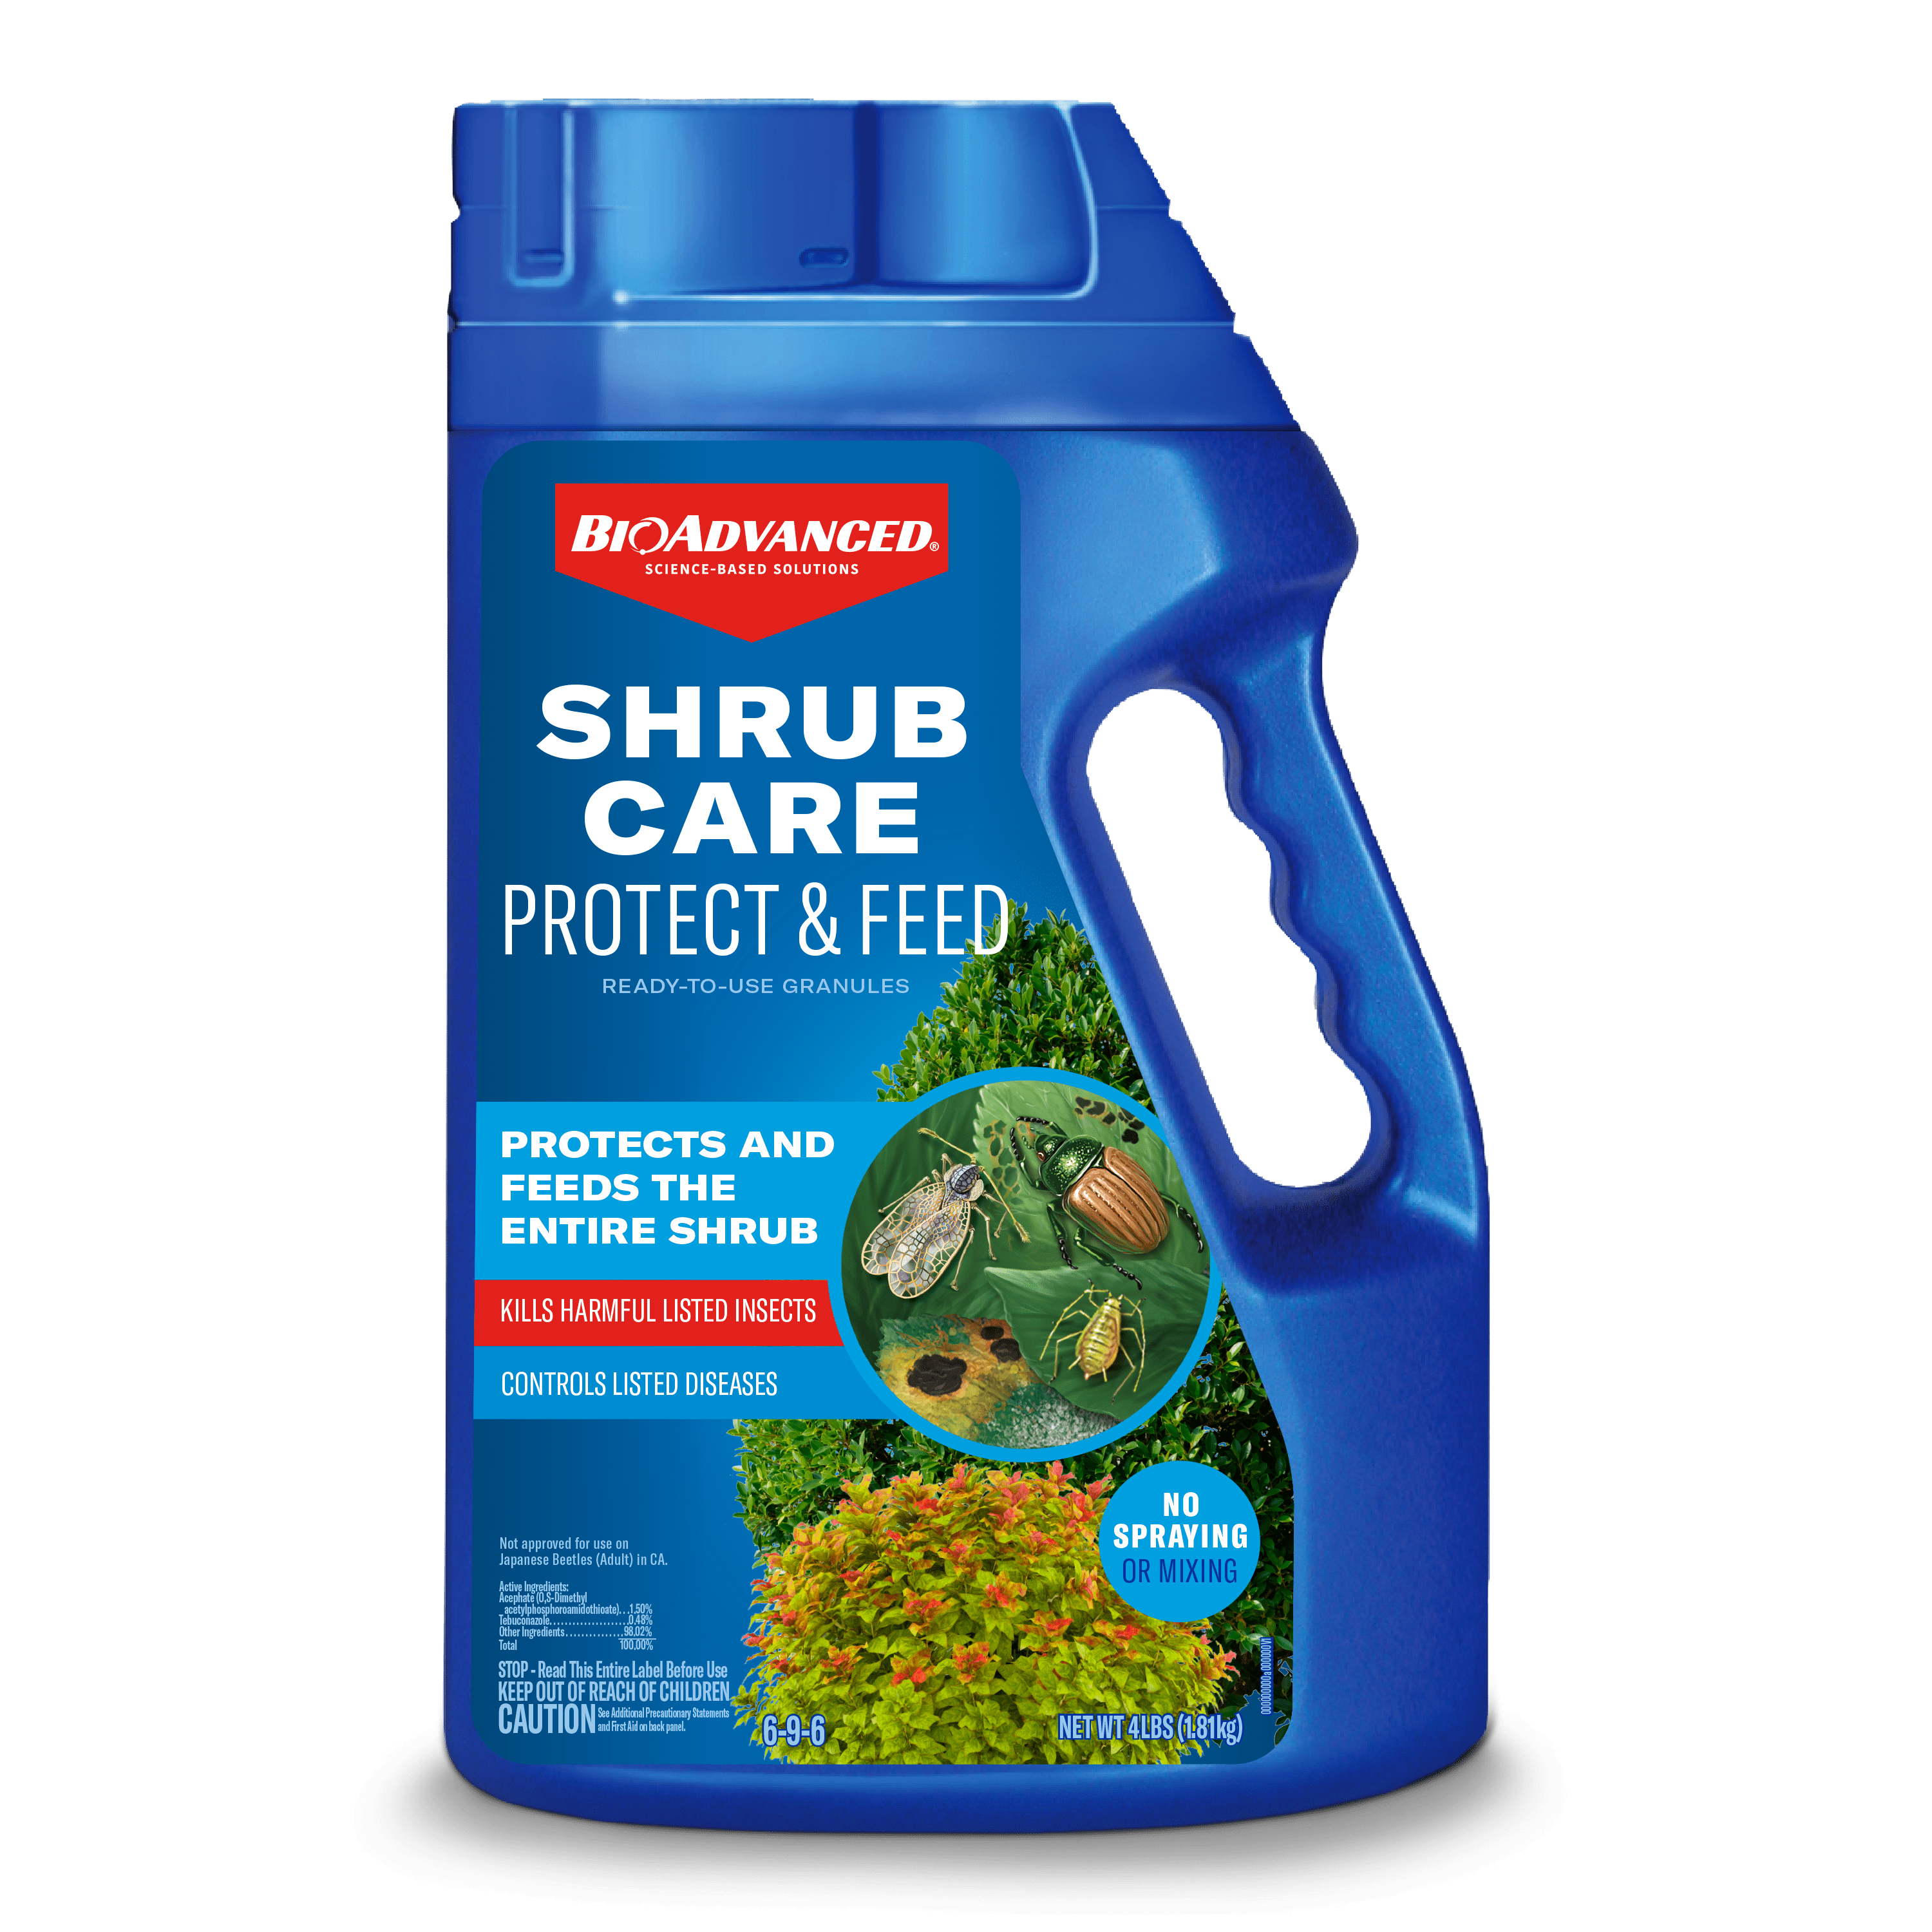 BioAdvanced Shrub Care Protect & Feed 4lb Granule, Controls Insects & Diseases Plus Feeds